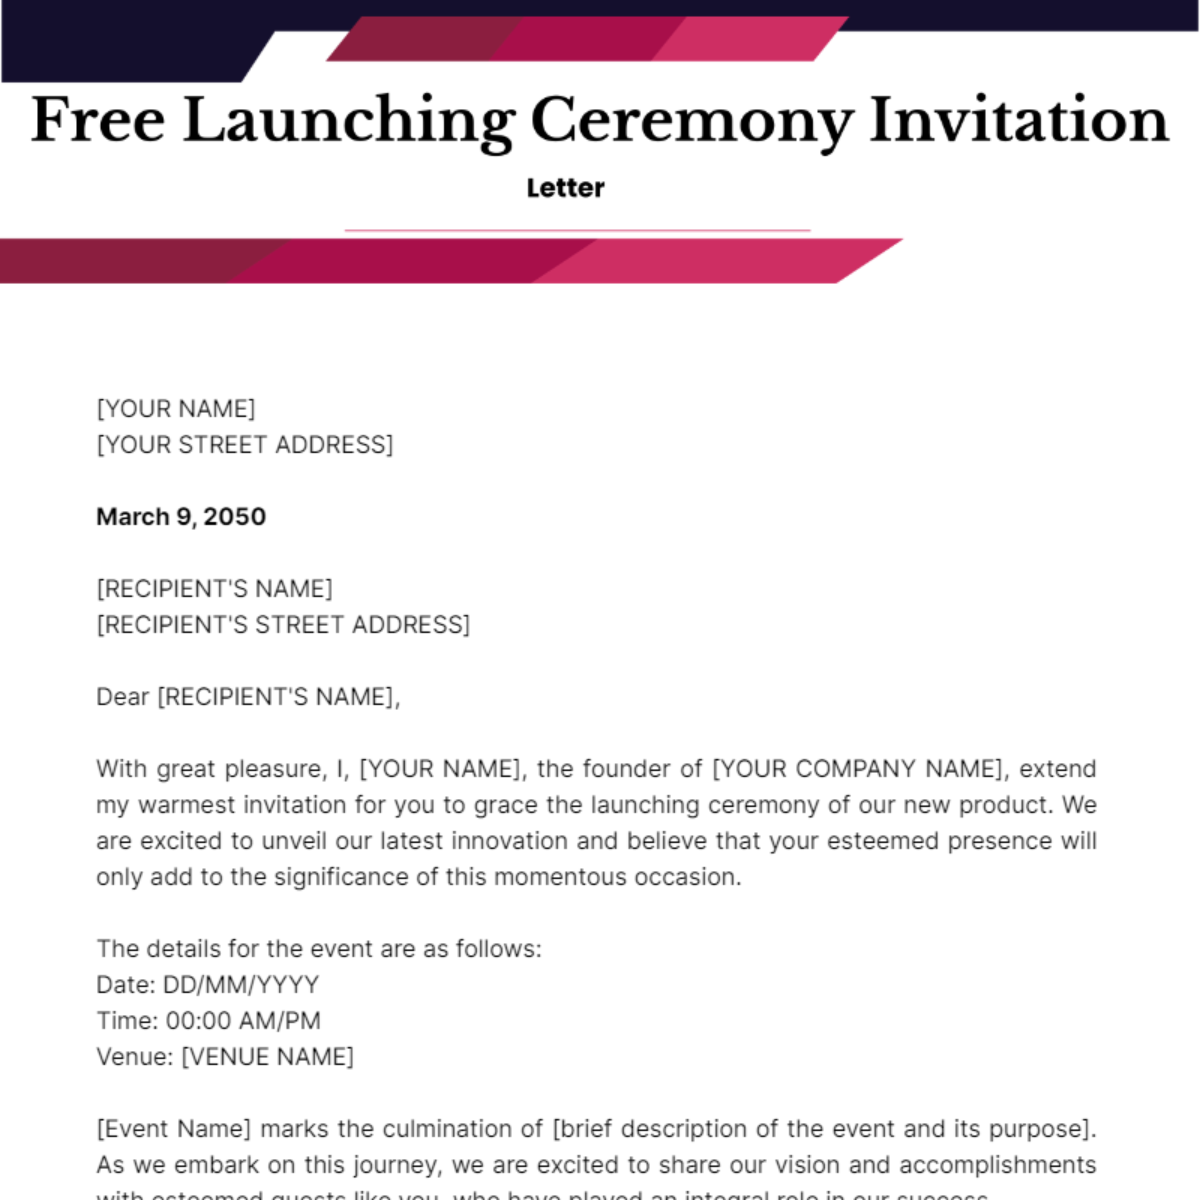 Launching Ceremony Invitation Letter Template